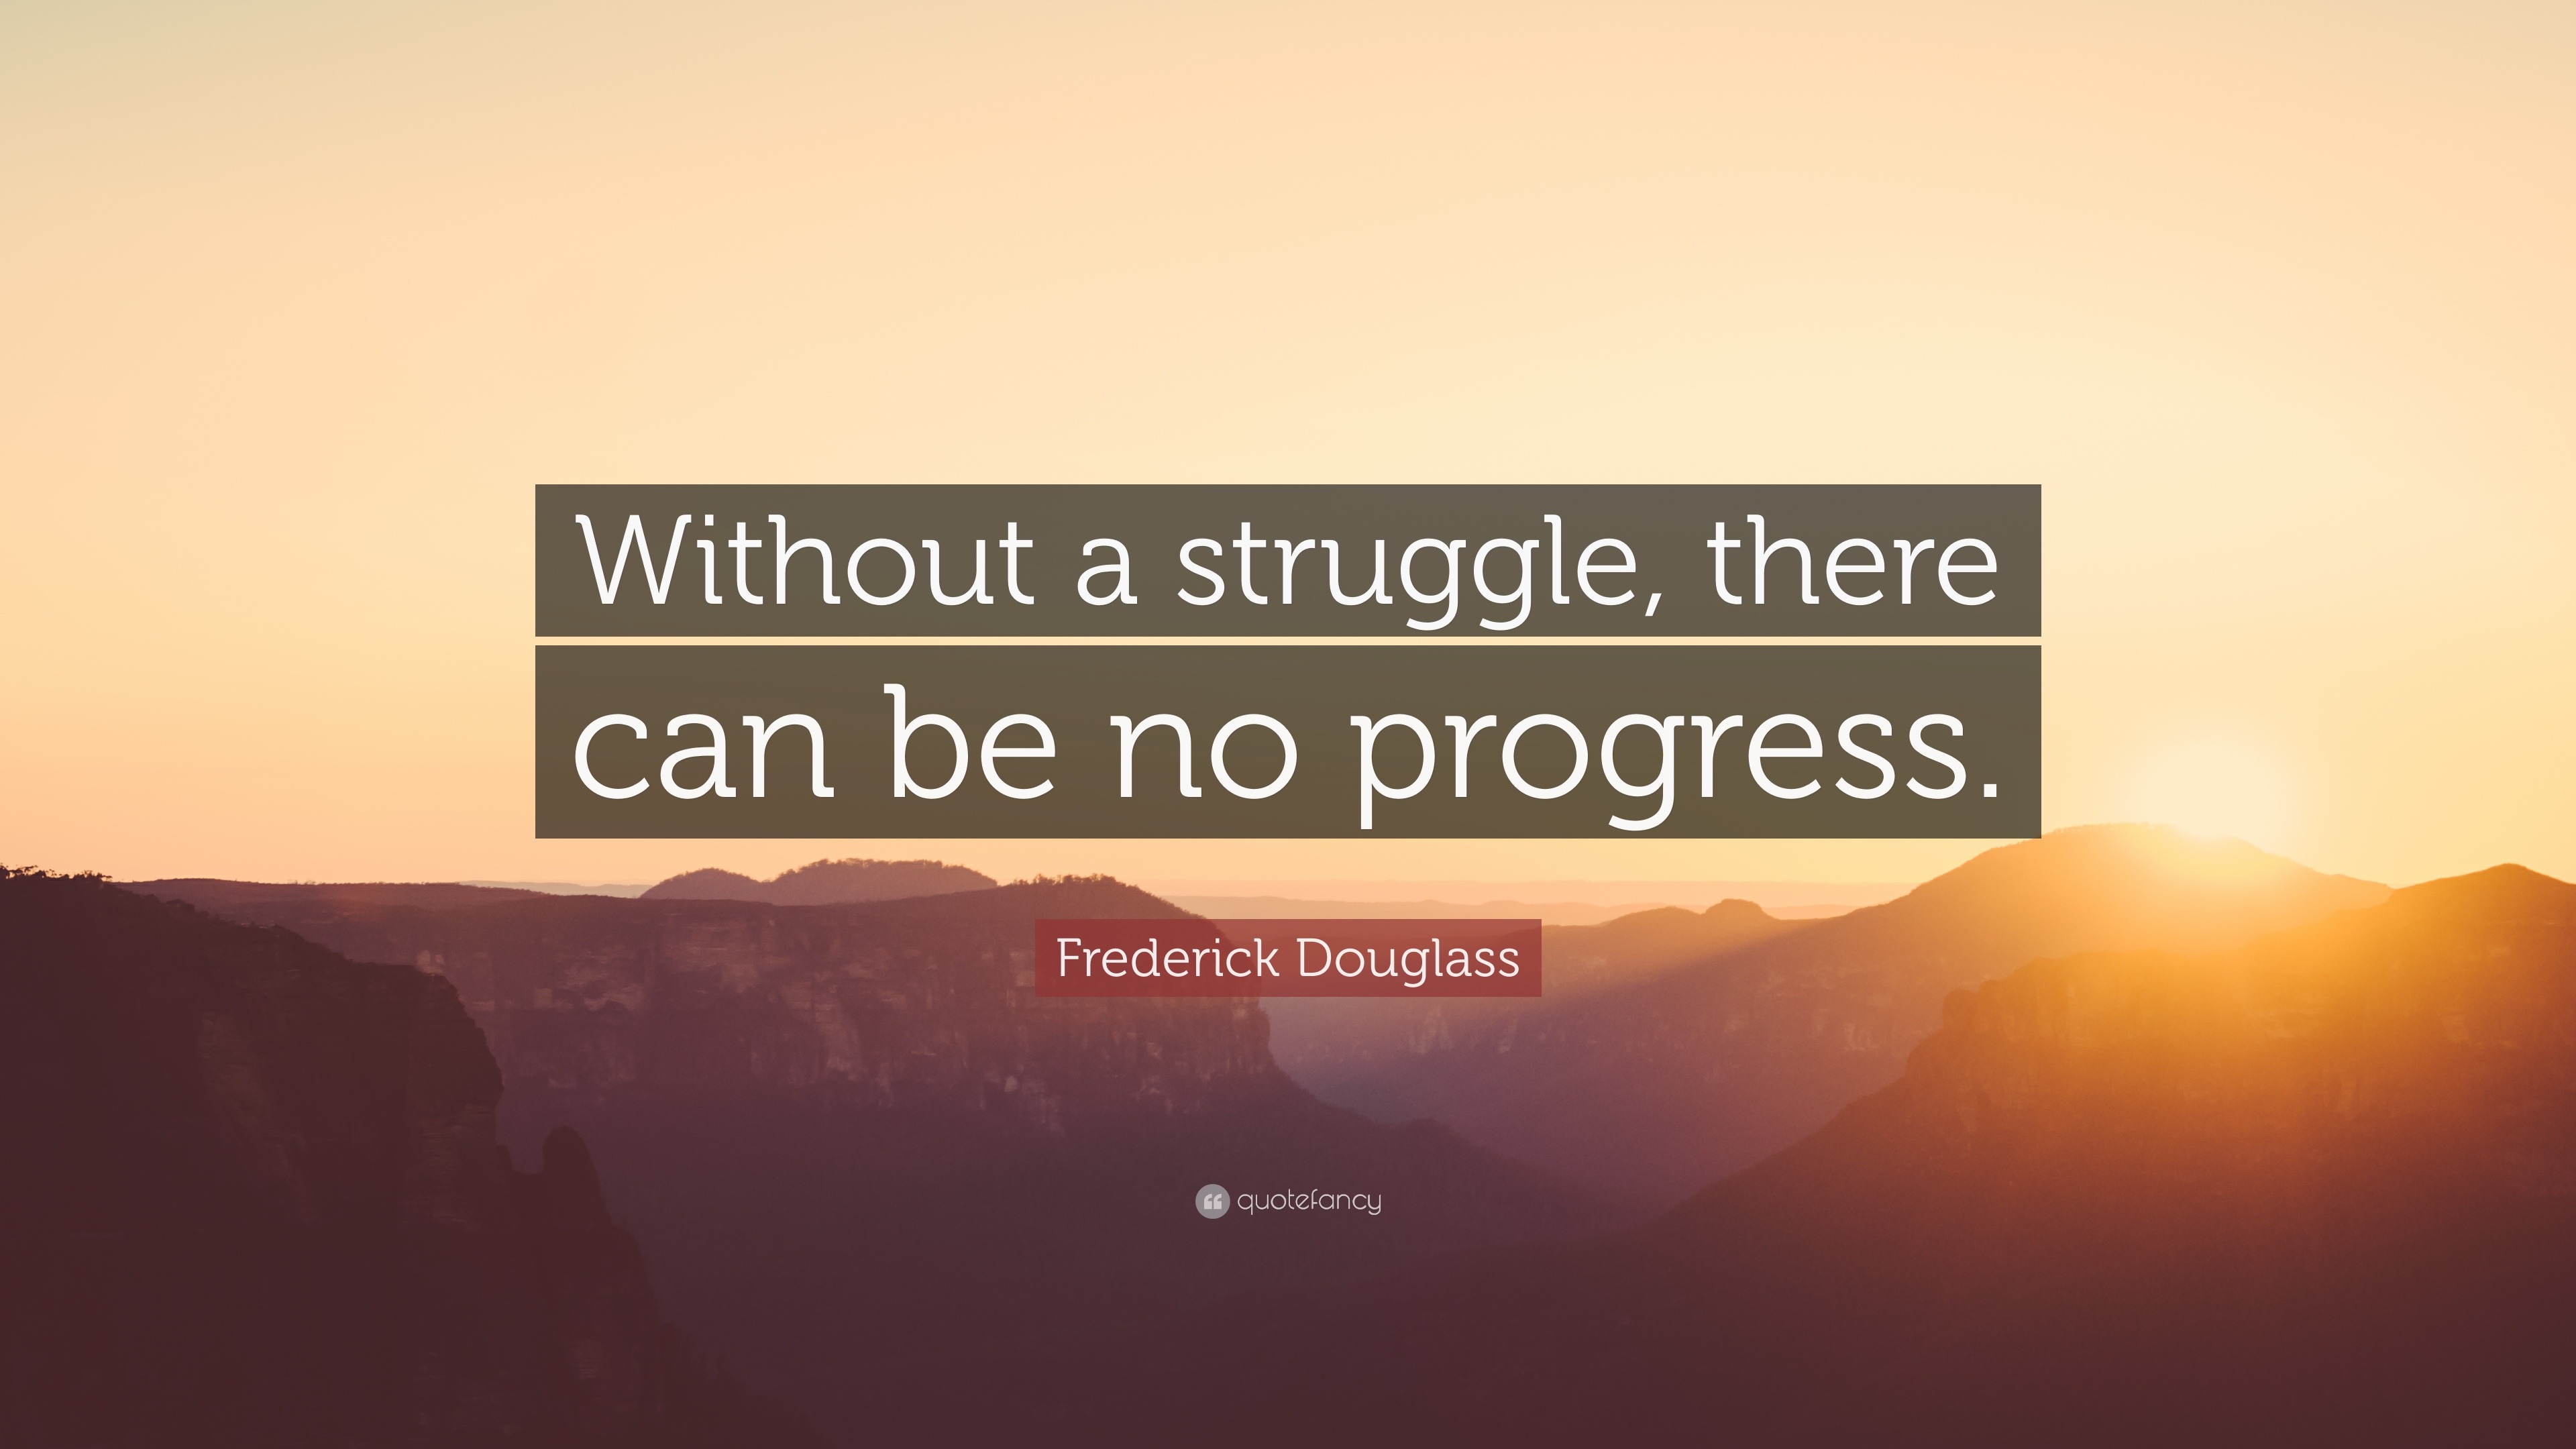 Frederick Douglass Quote: “Without a struggle, there can be no progress.”